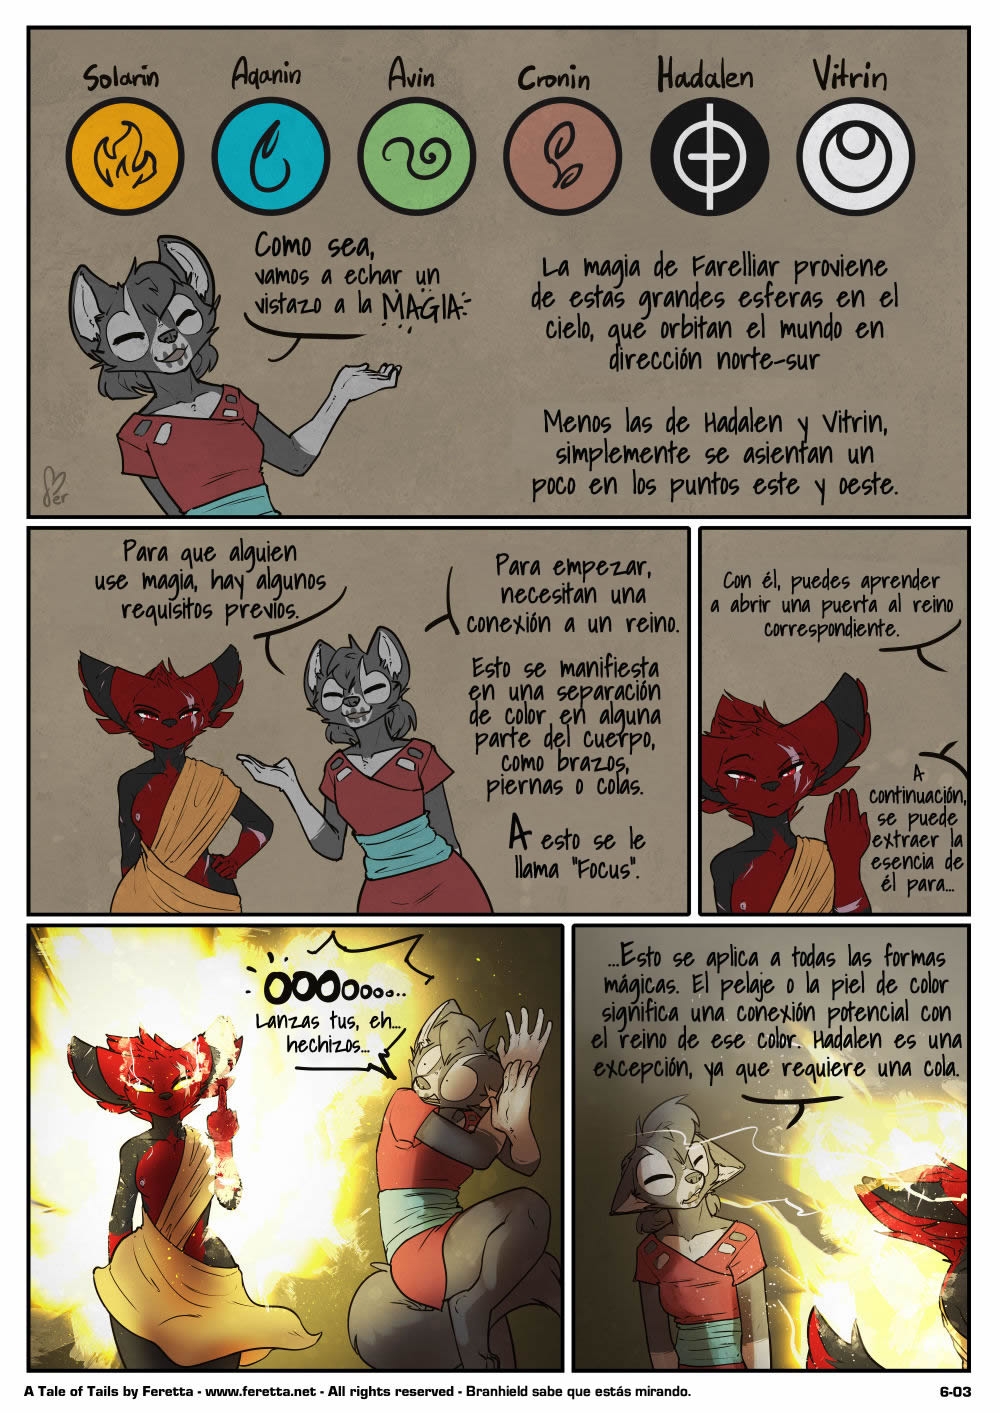 [Feretta] A Tale of Tails: Chapter 6 - Paths converge / Los caminos convergen [Spanish] [Red Fox Makkan] 3